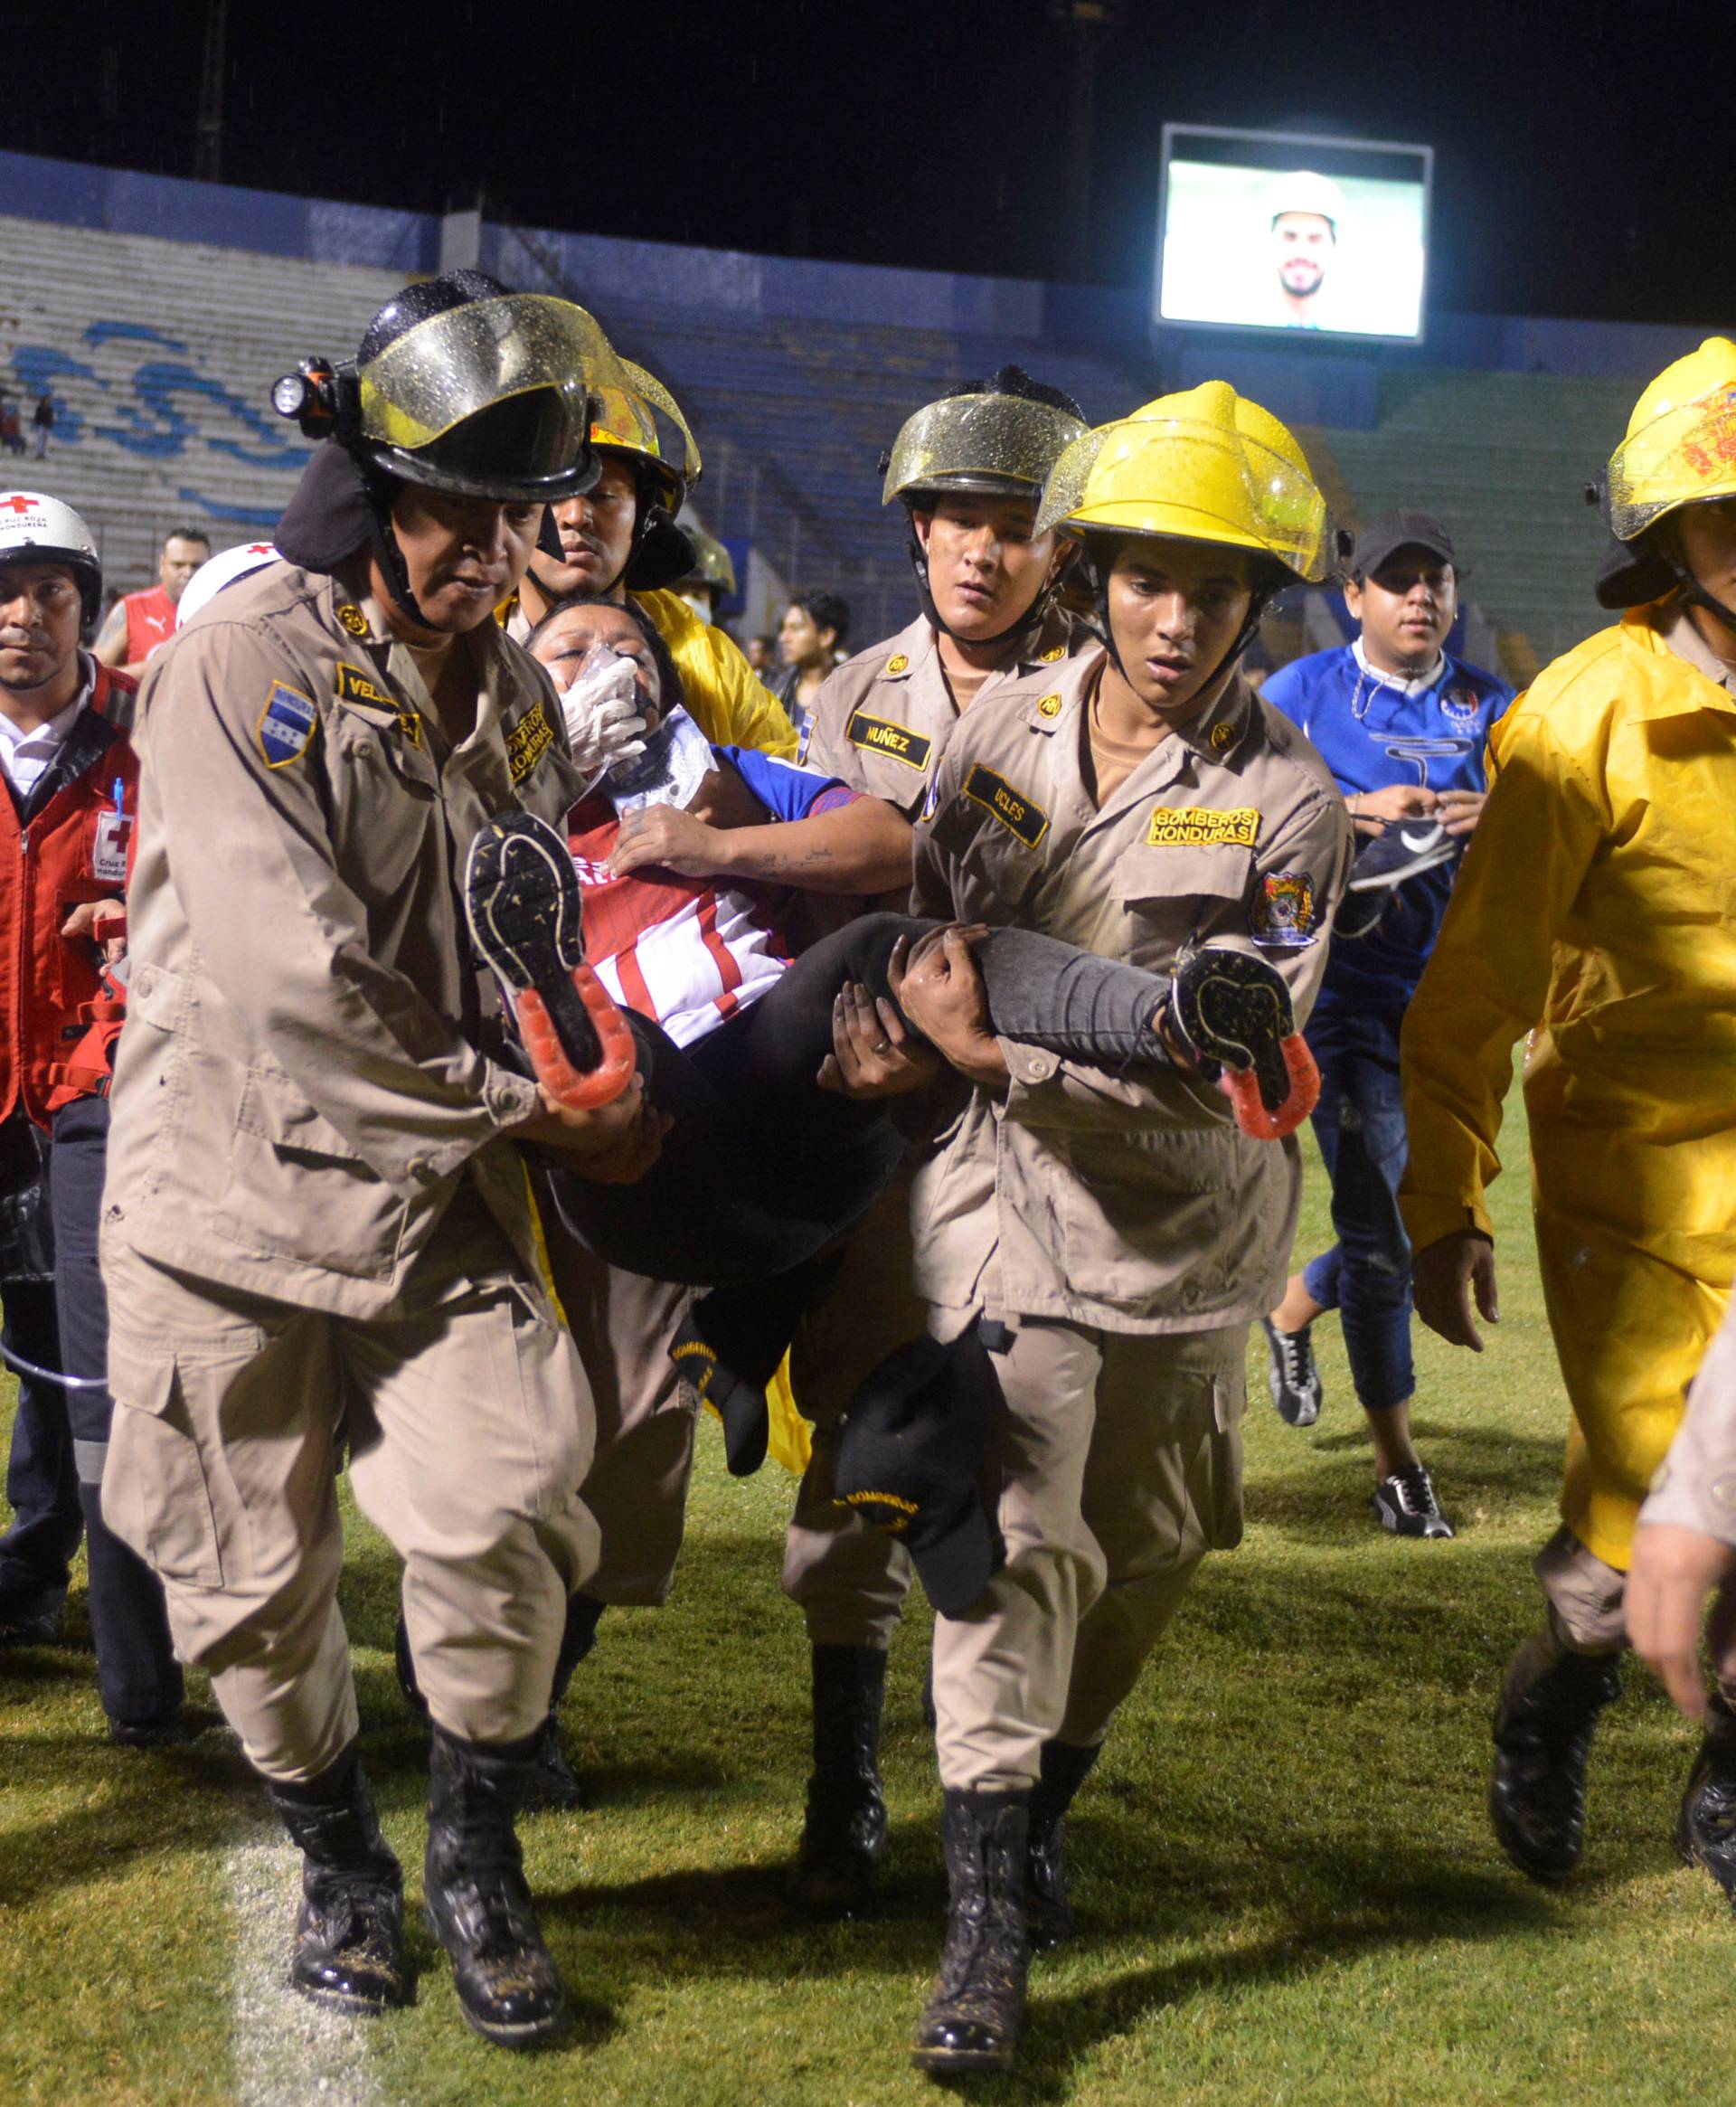 Firefighters carry a woman after three people died in riots before a soccer match when the fans attacked a bus carrying one of the teams, at the National Stadium in Tegucigalpa